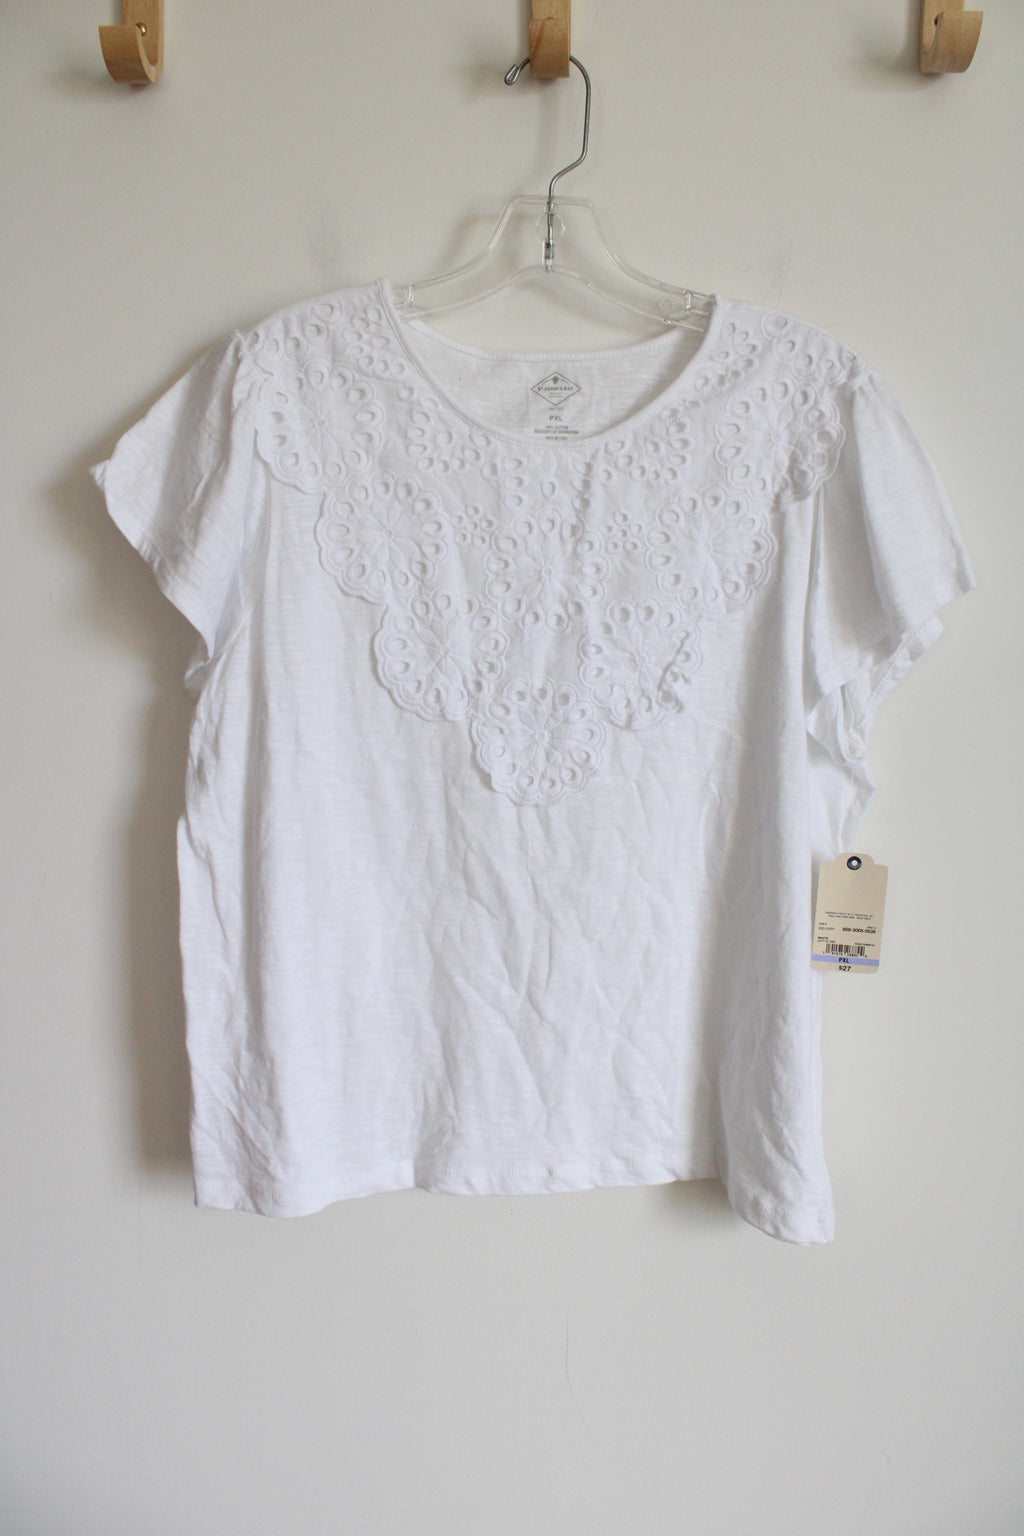 NEW St. John's Bay White Lace Front Tee | XL Petite